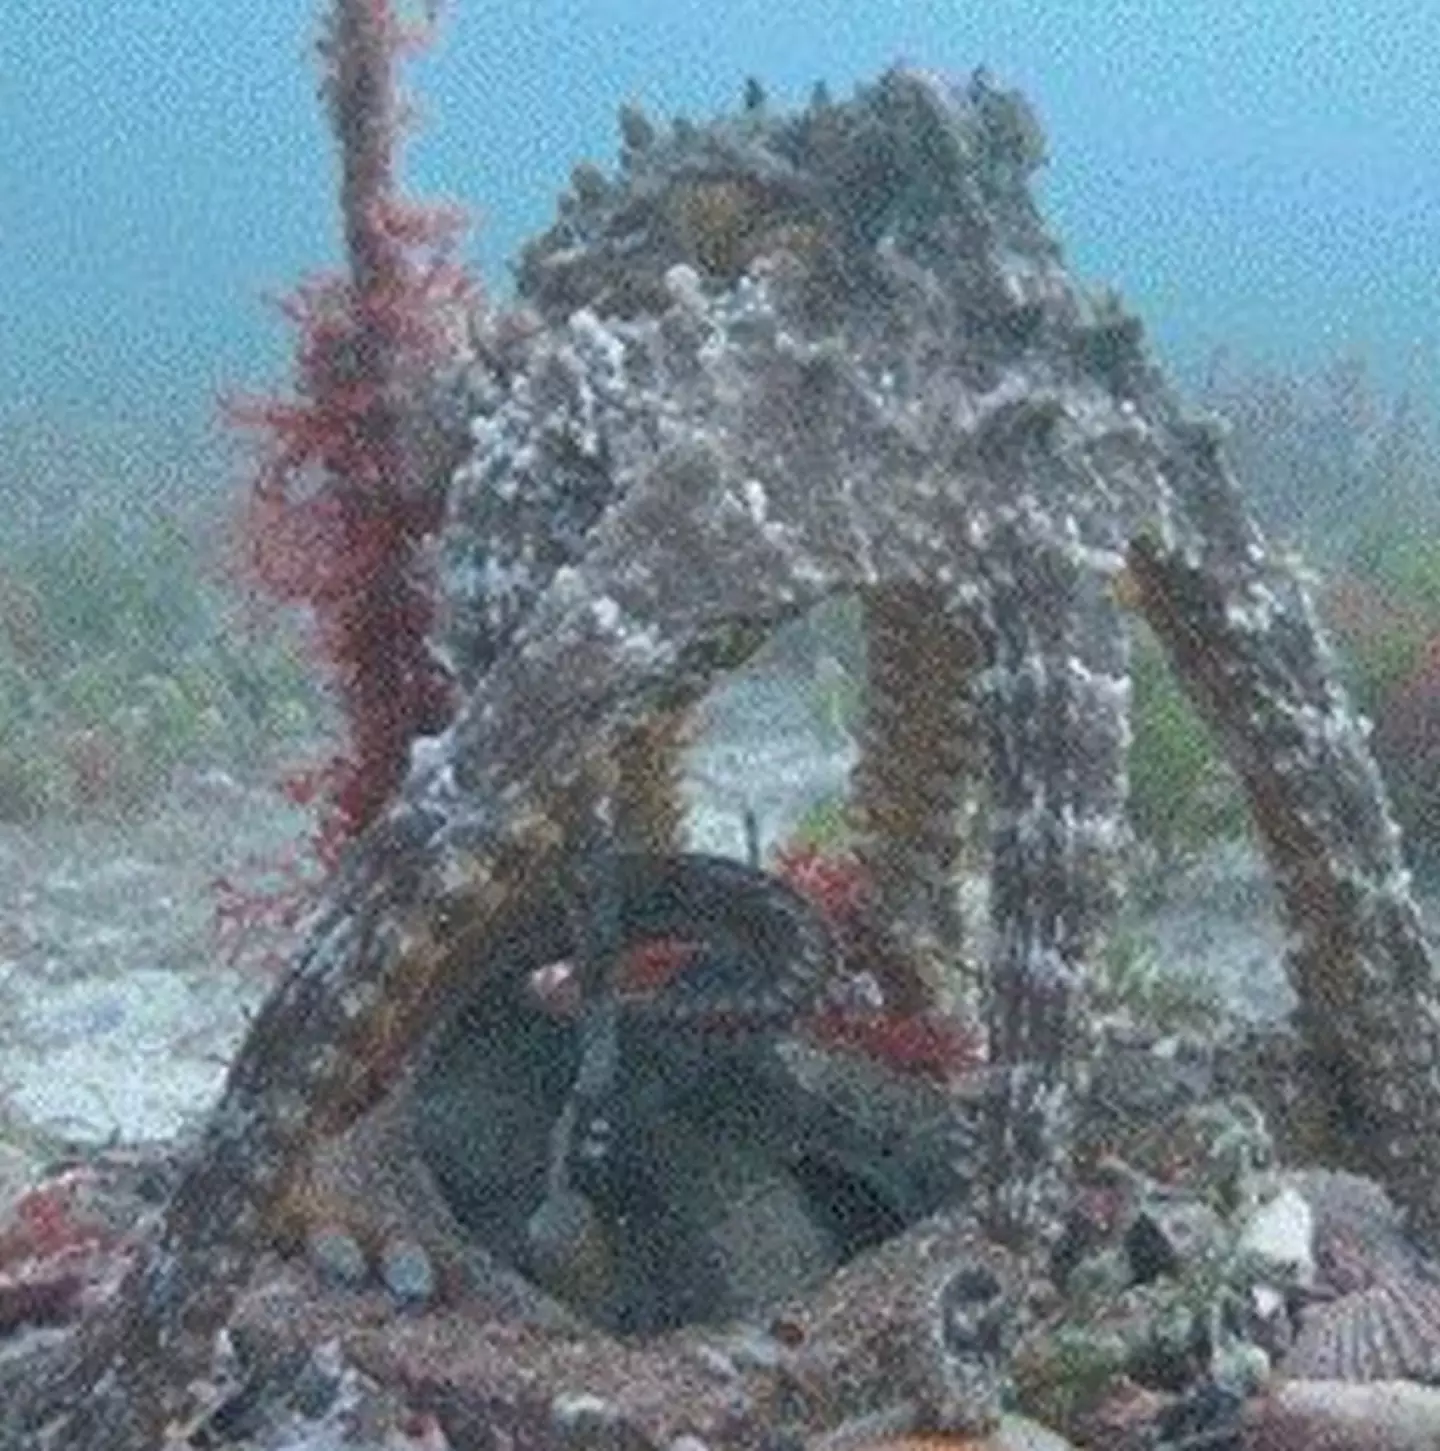 The octopuses at Octopolis and Octlantis have built underwater communities.